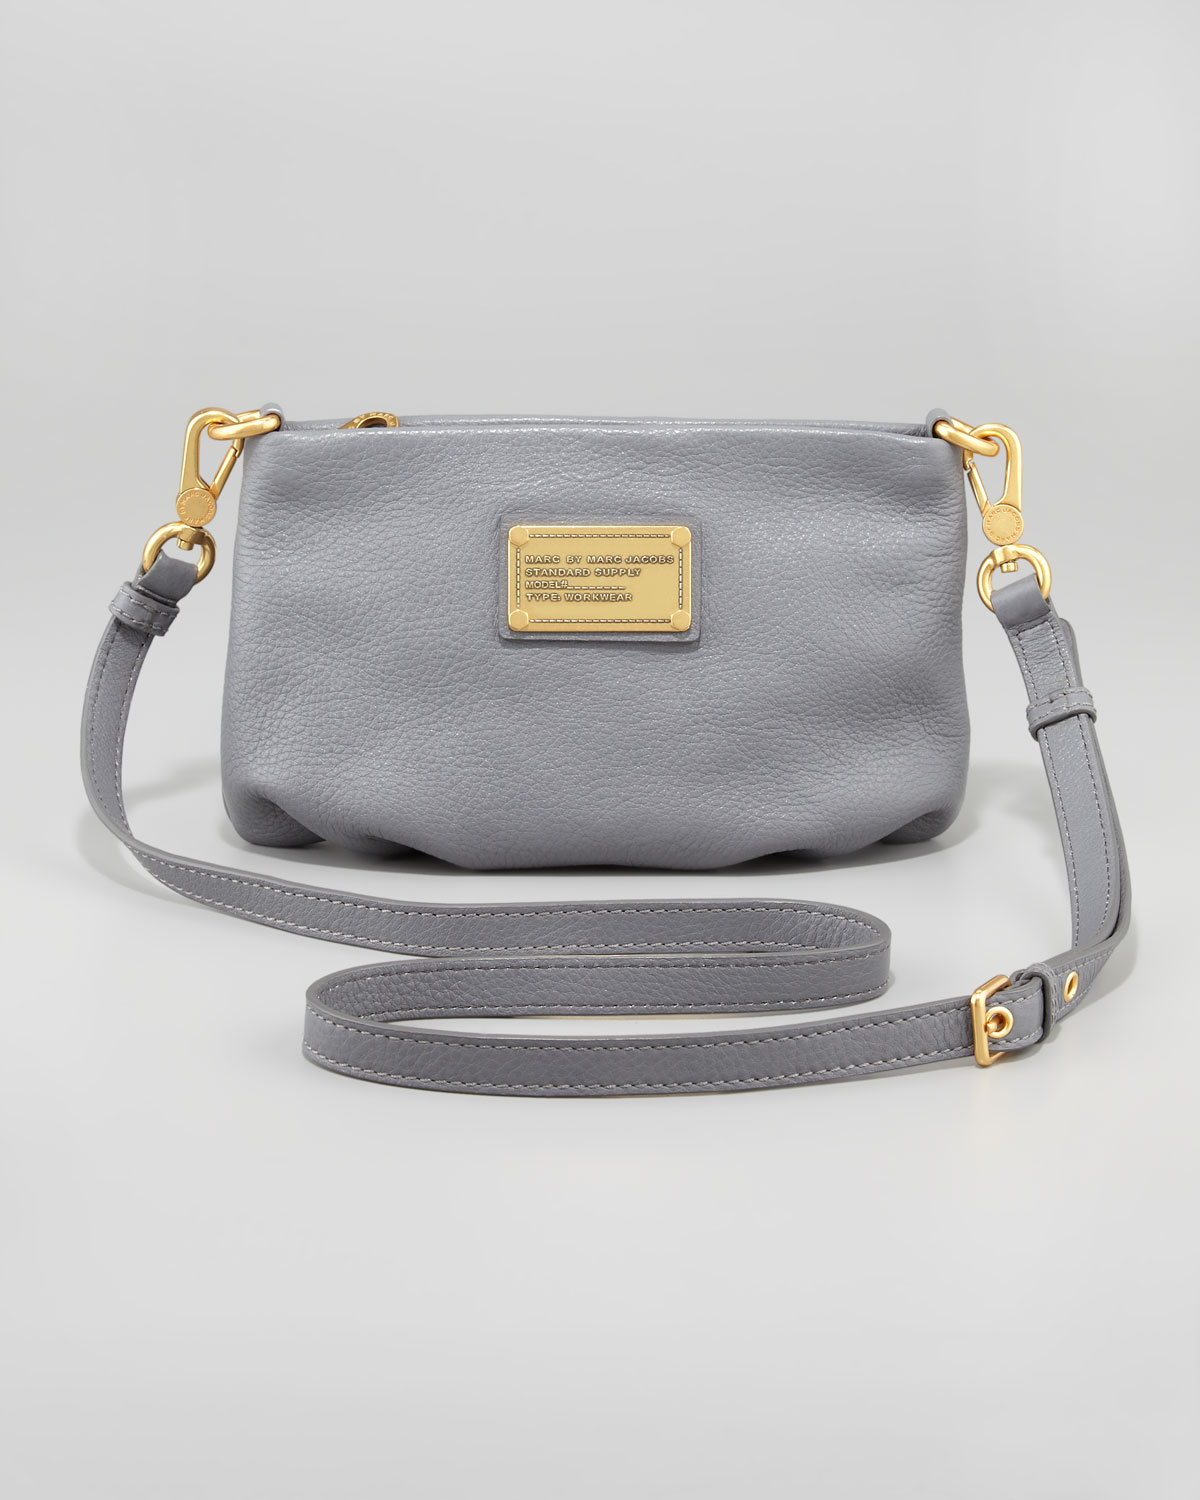 Marc By Marc Jacobs Classic Q Percy Crossbody Bag in Gray - Lyst